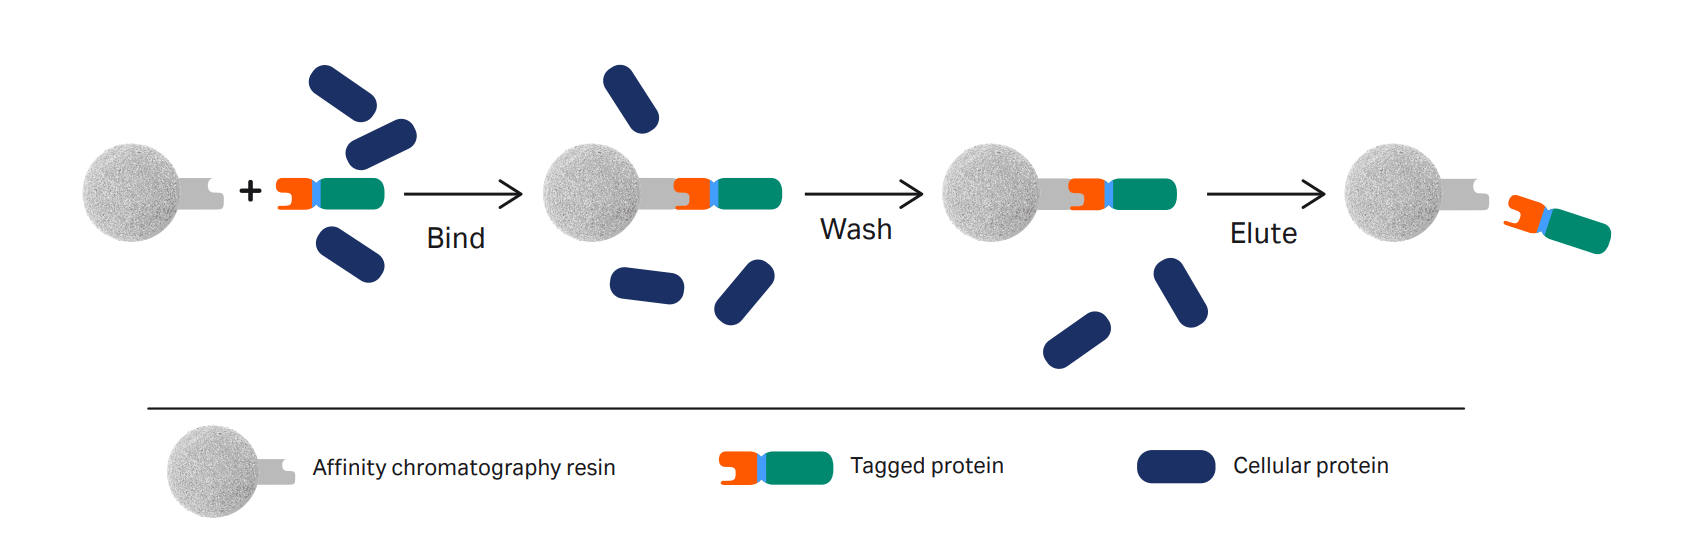 Tagged Protein Purification | Cytiva